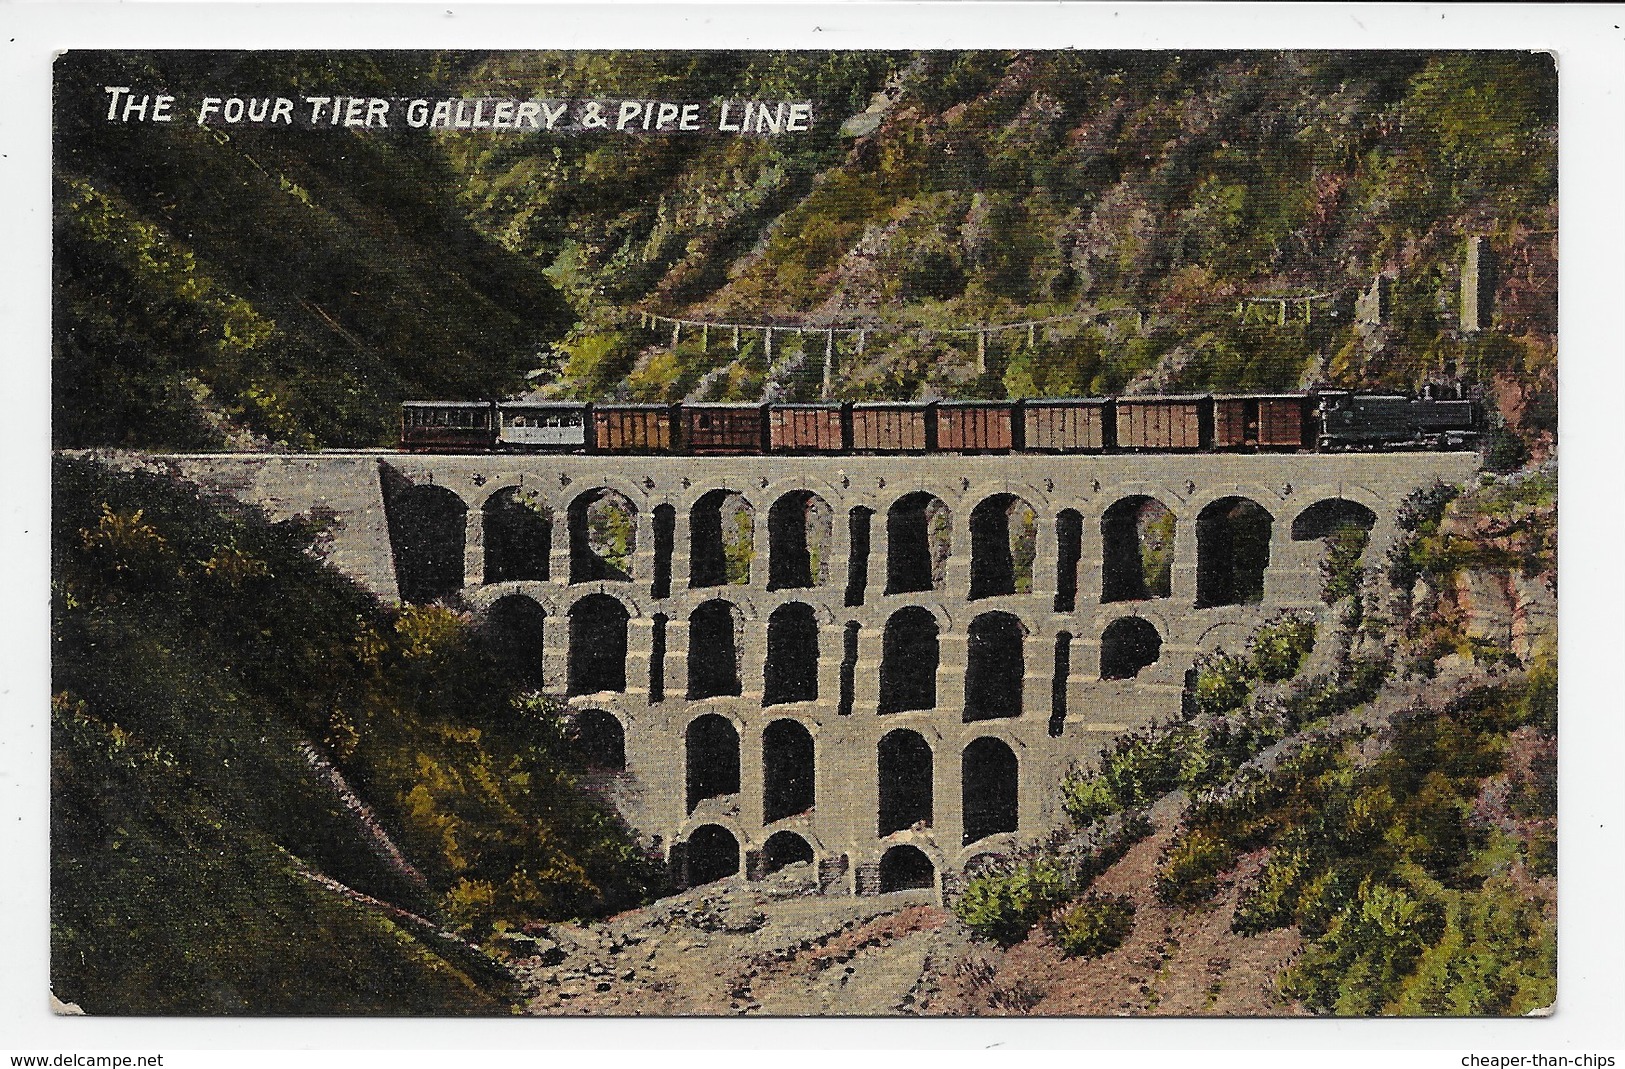 The Four Tier Gallery & Pipe Line - India